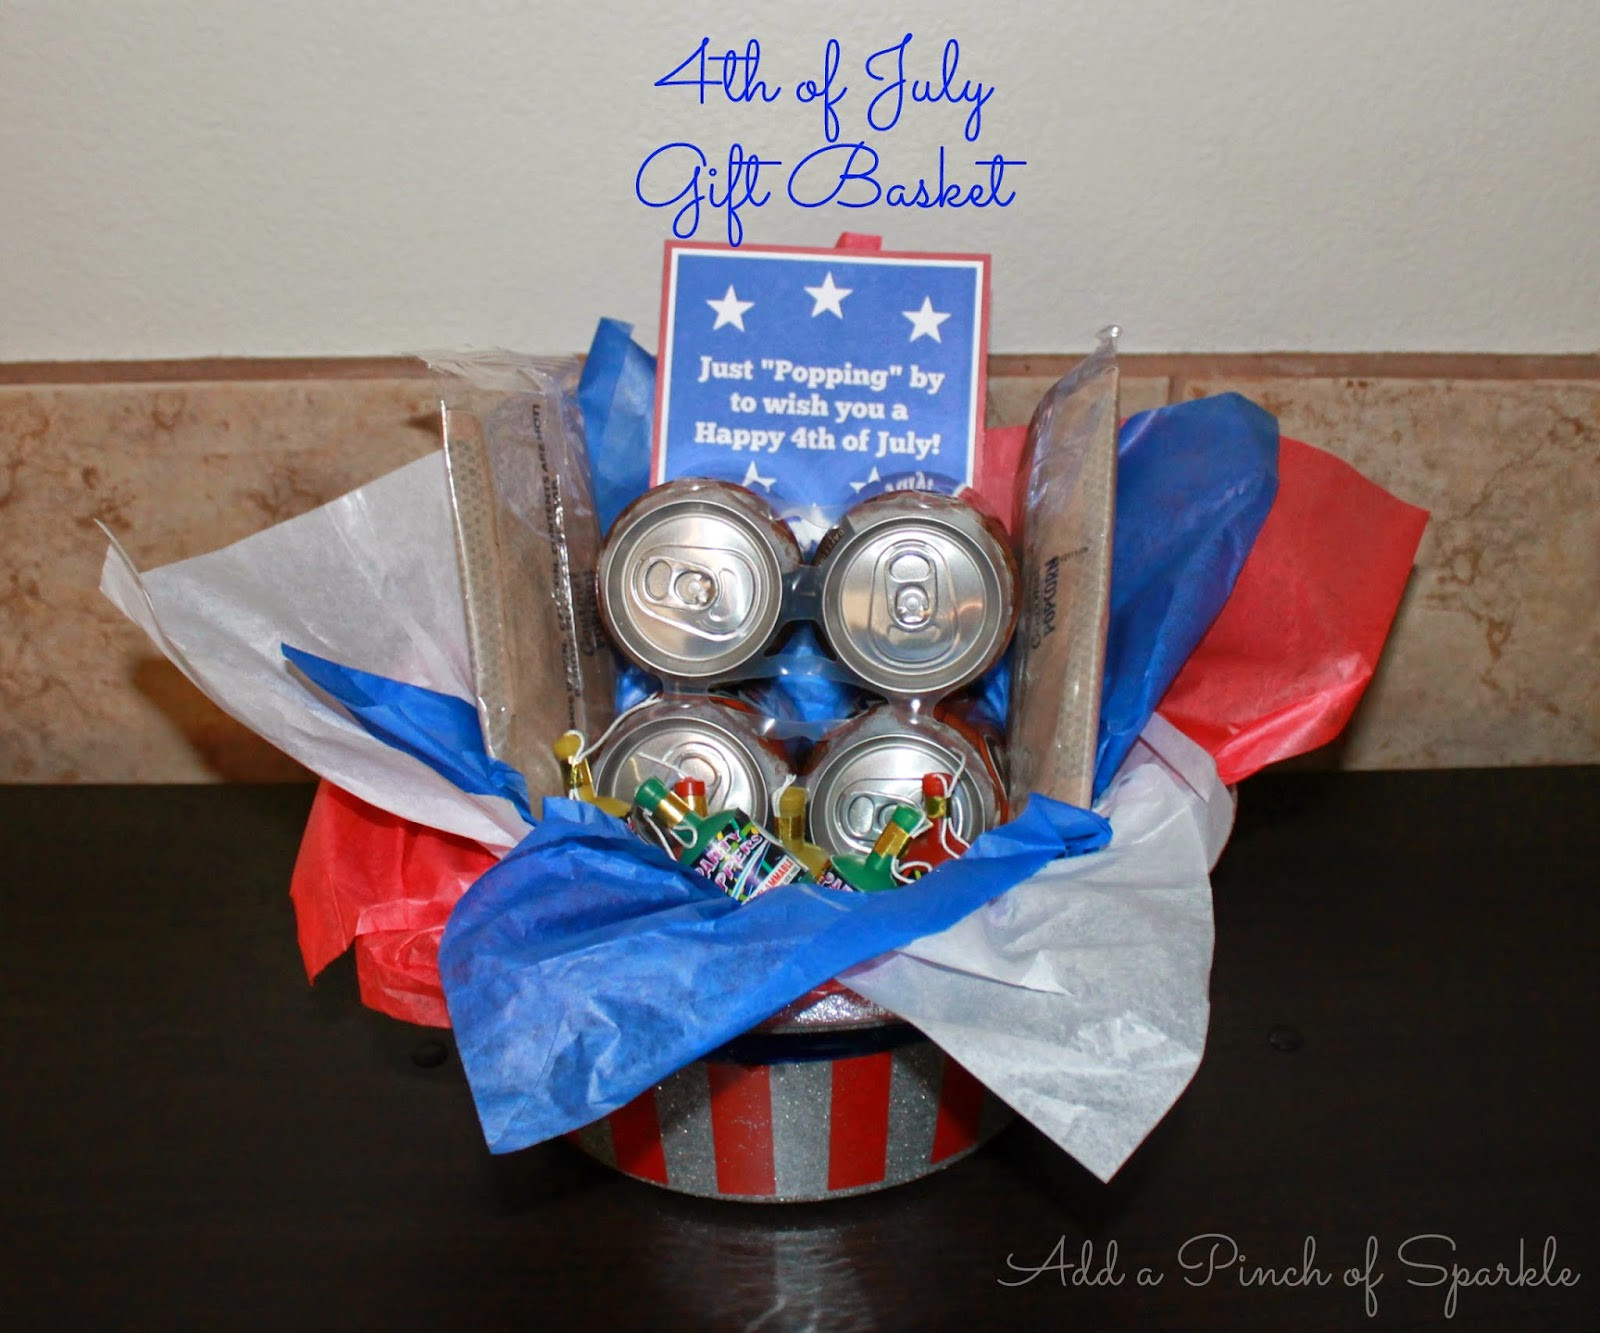 Fourth Of July Gifts
 Add A Pinch Sparkle 4th of July Gift Basket